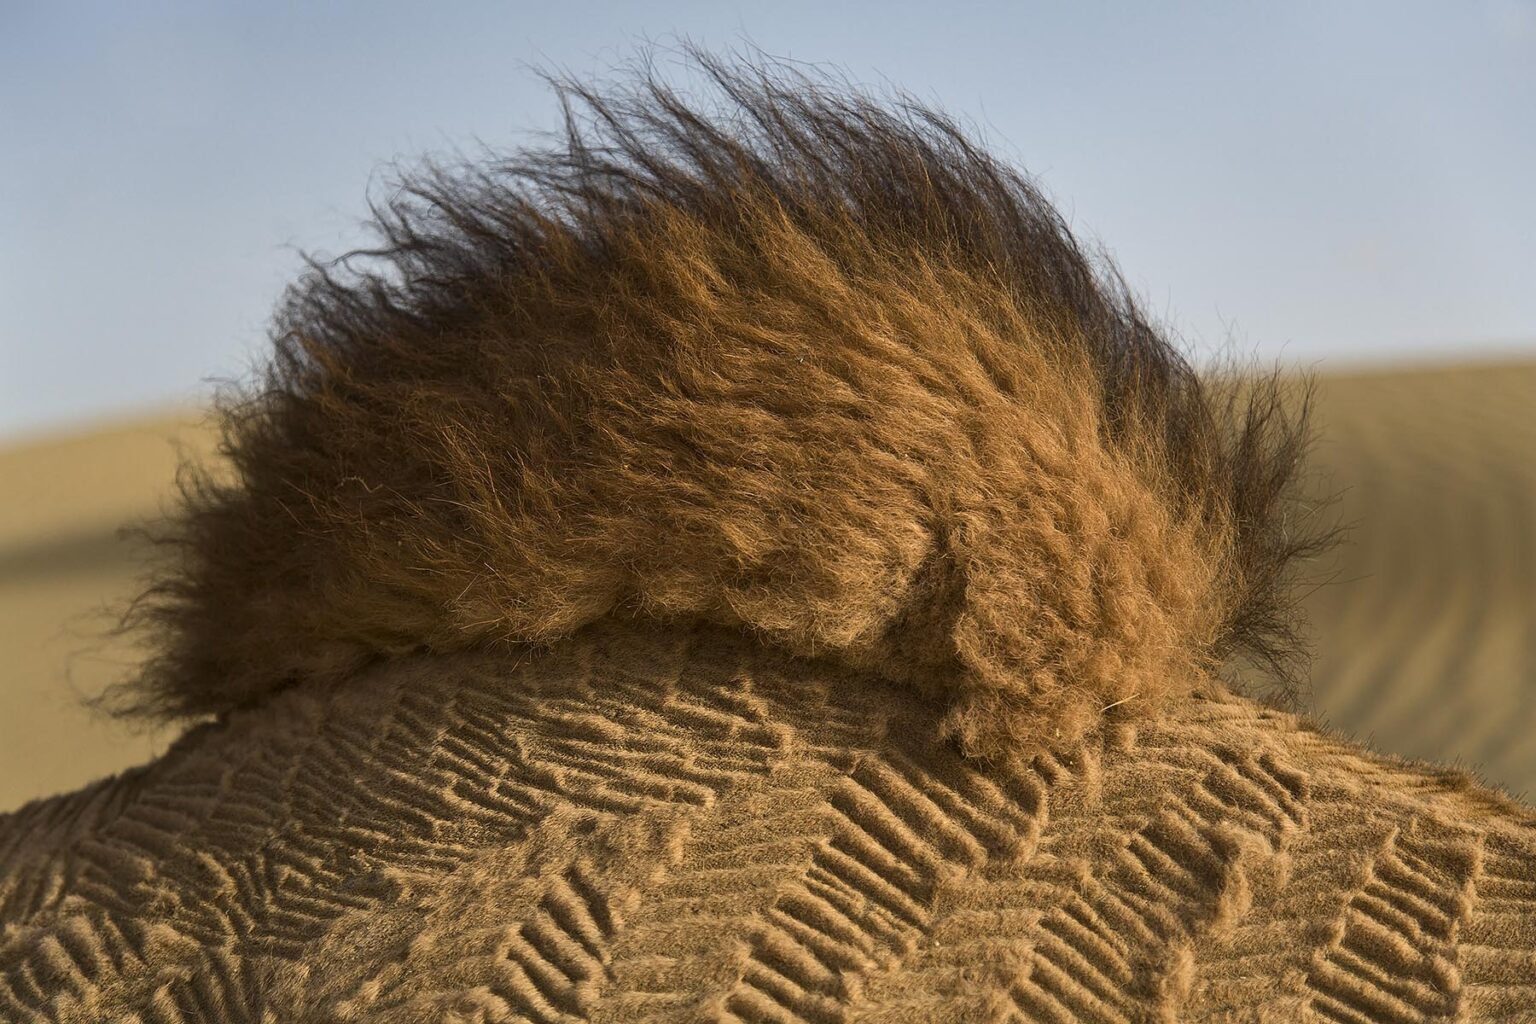 A young CAMELS (Camelus bactrianus) HUMP in the THAR DESERT - RAJASTHAN, INDIA